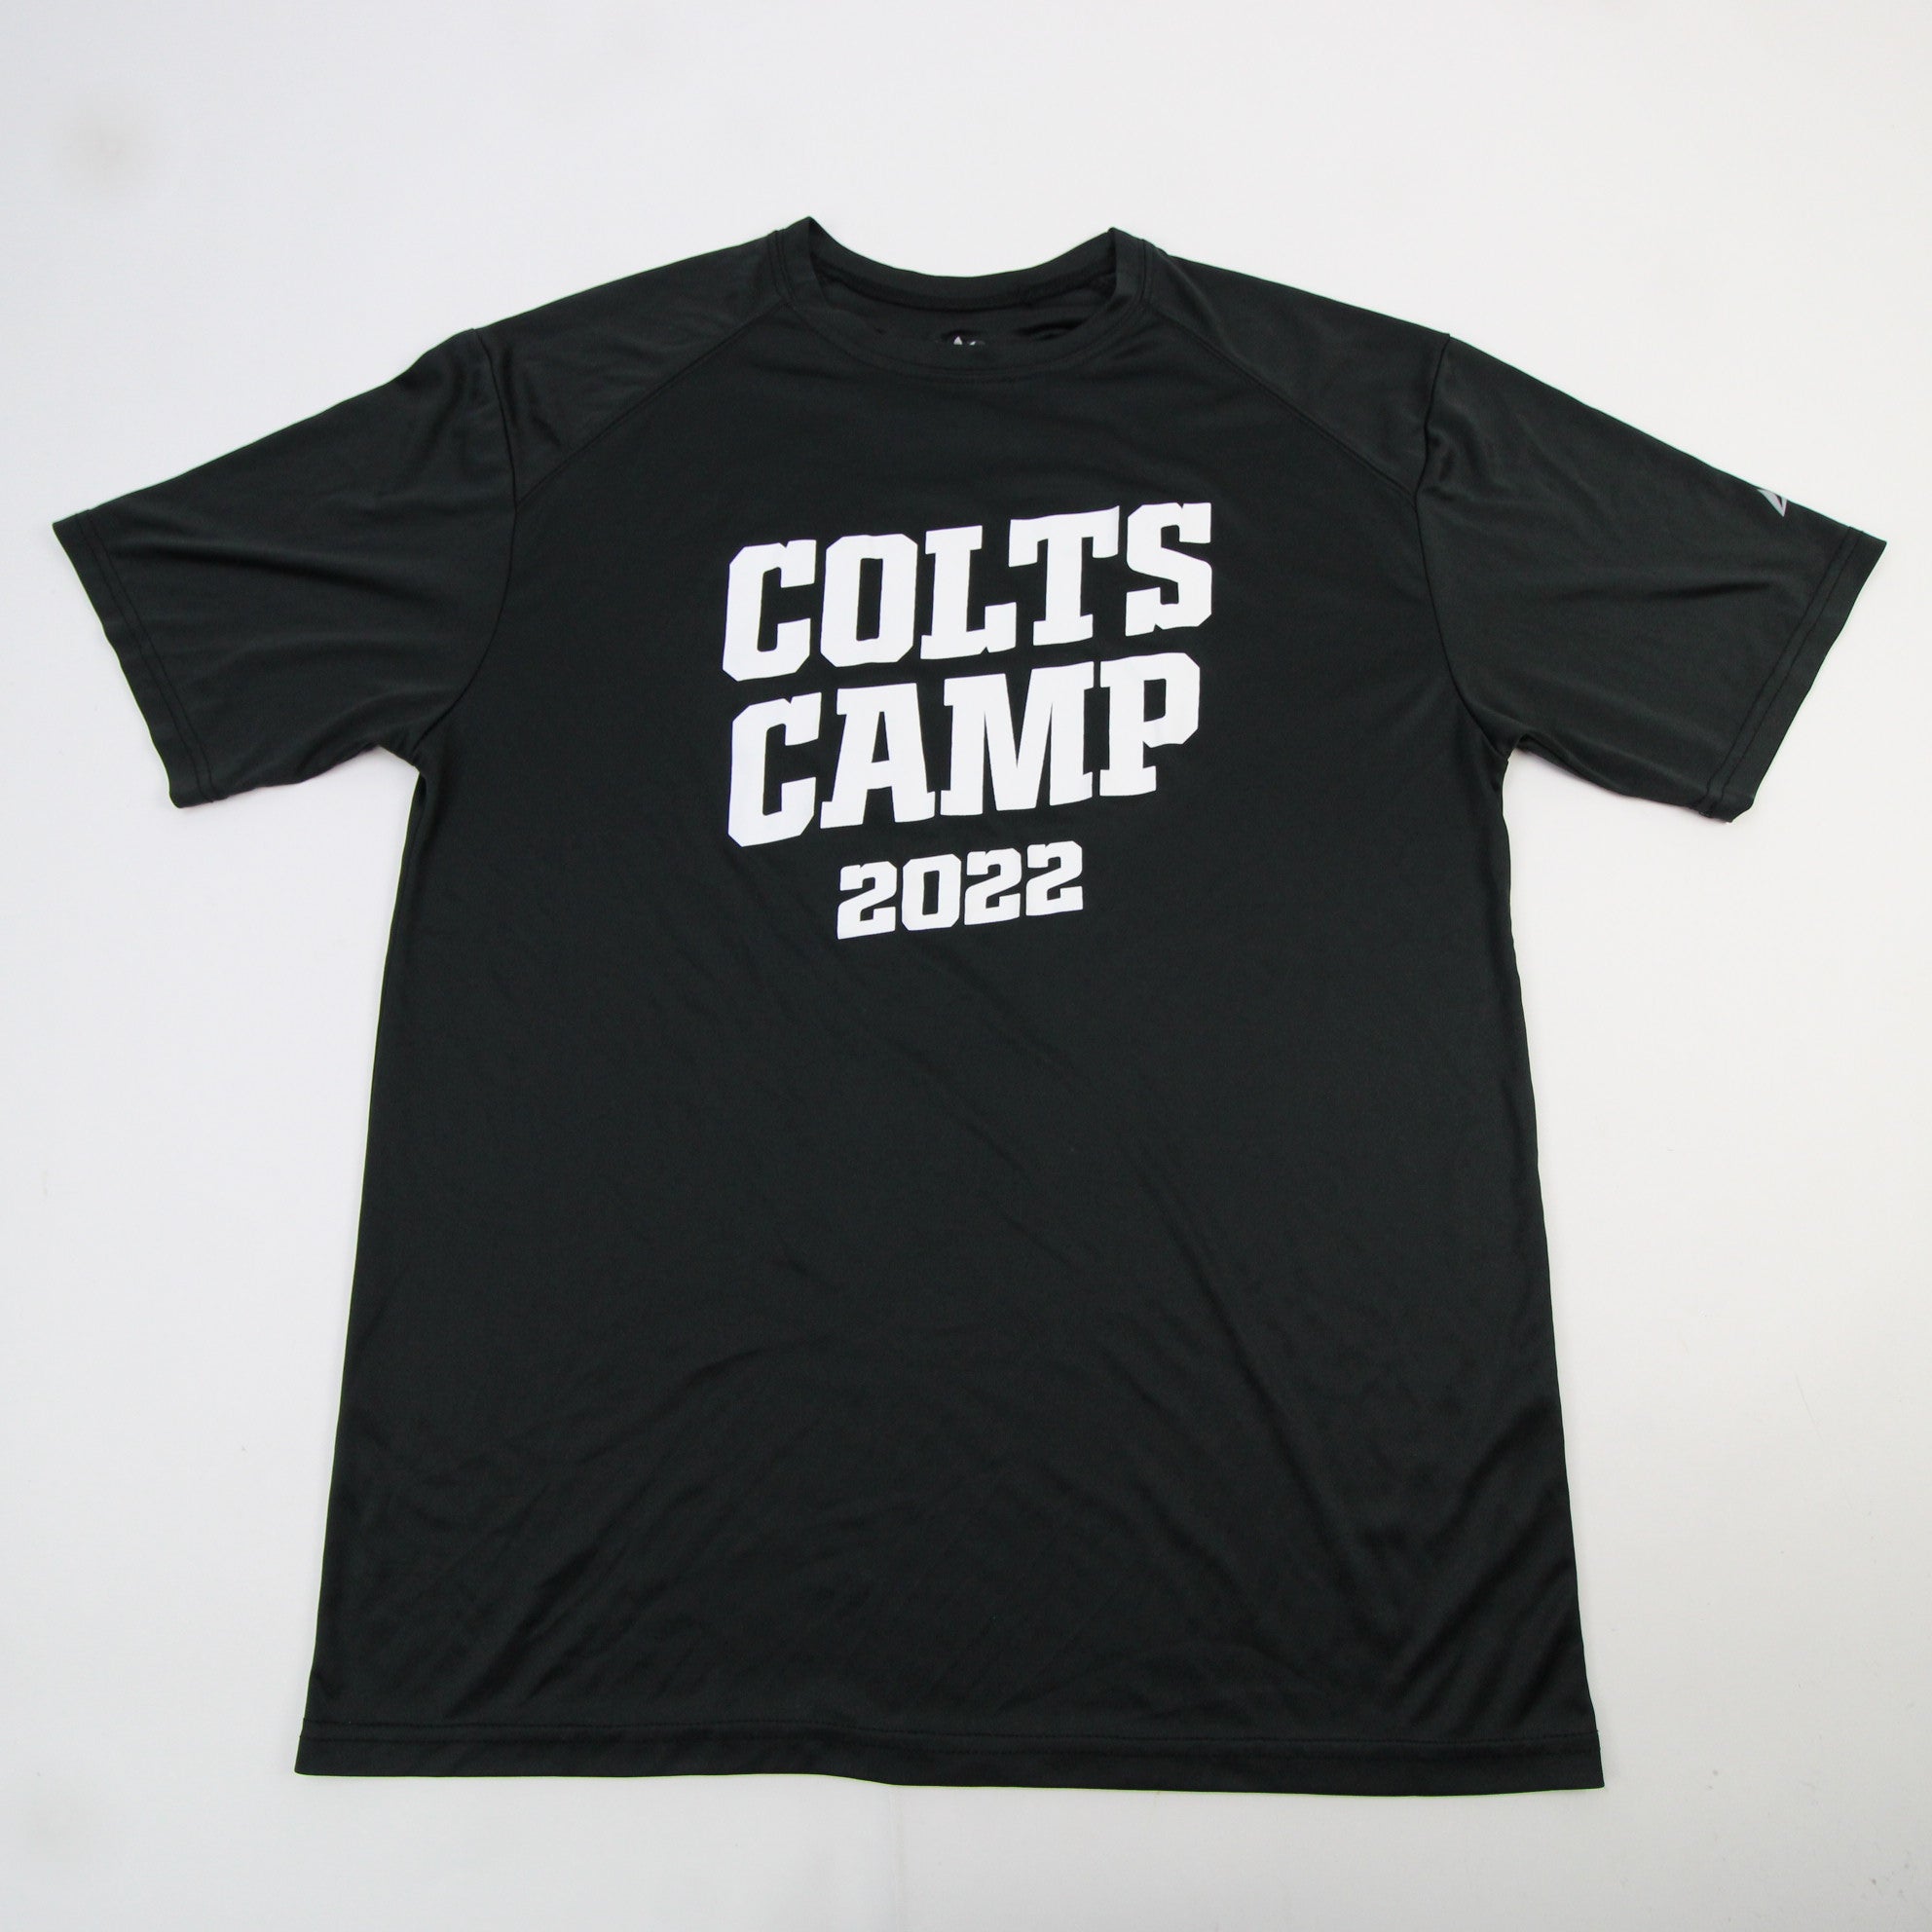 Indianapolis Colts BSN Sports Short Sleeve Shirt Men's Black used 2XL